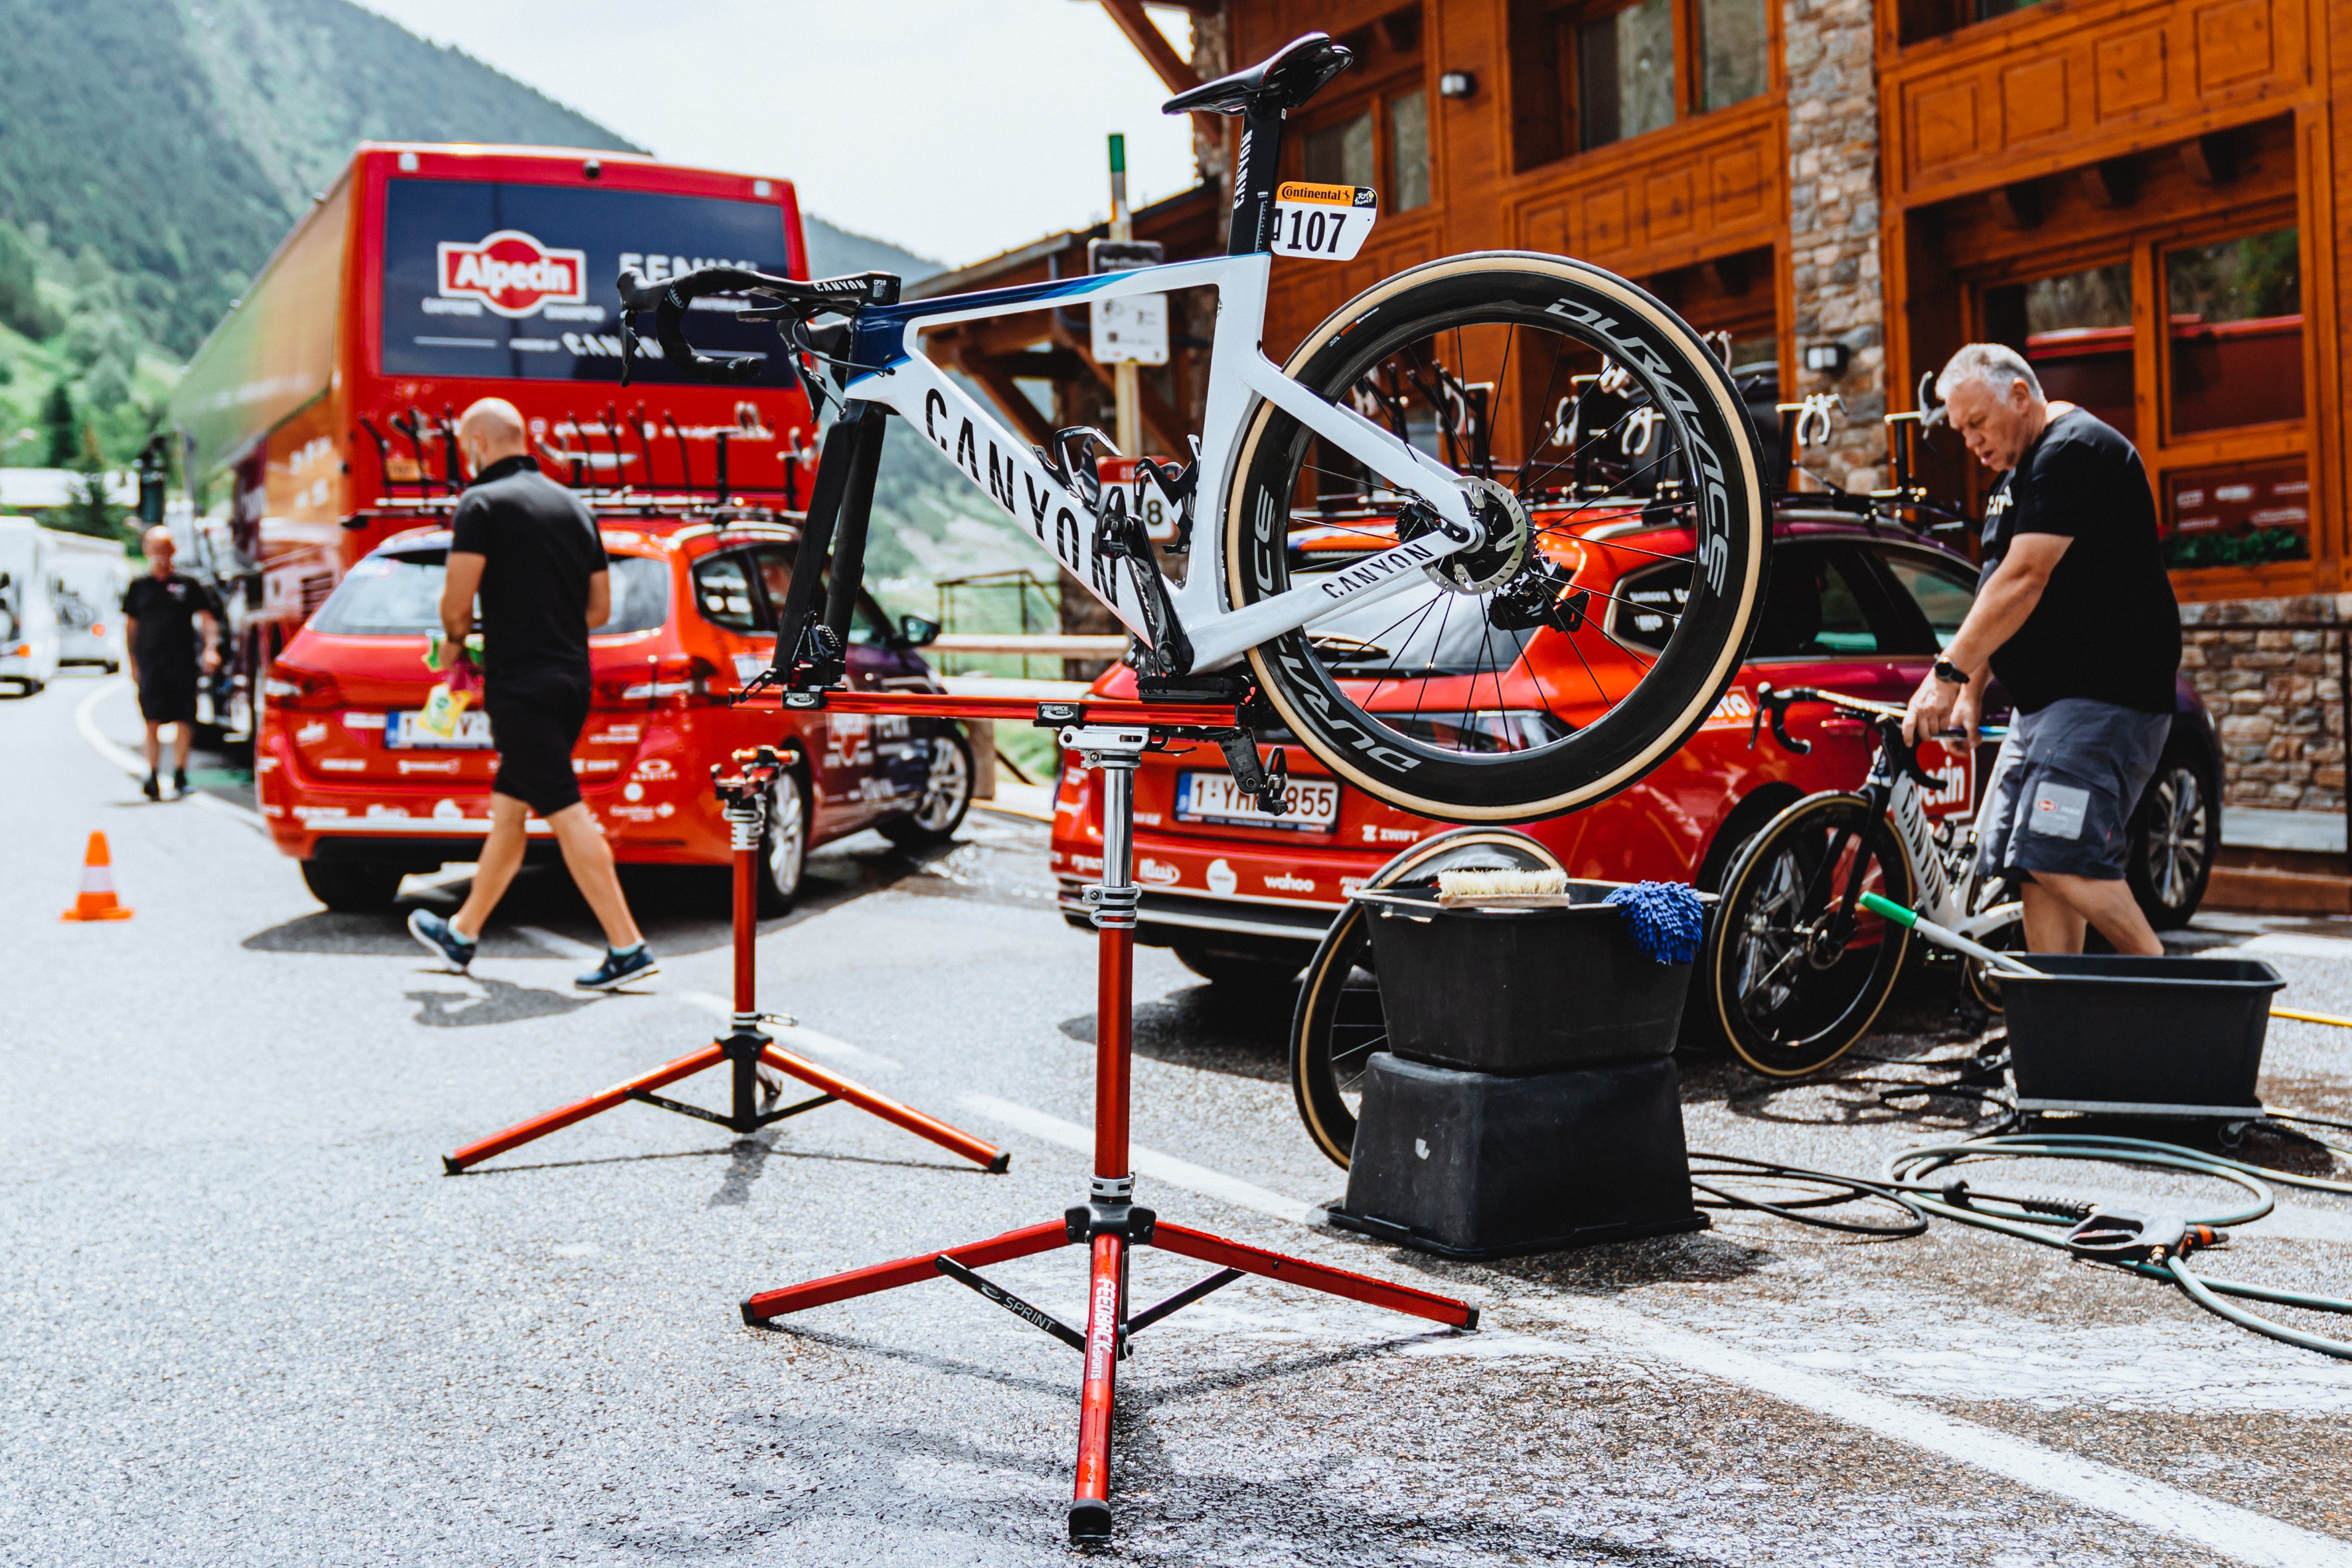 2 spring repair stands at the tour de france with a bike on one and the alpecin fenix team mechanics